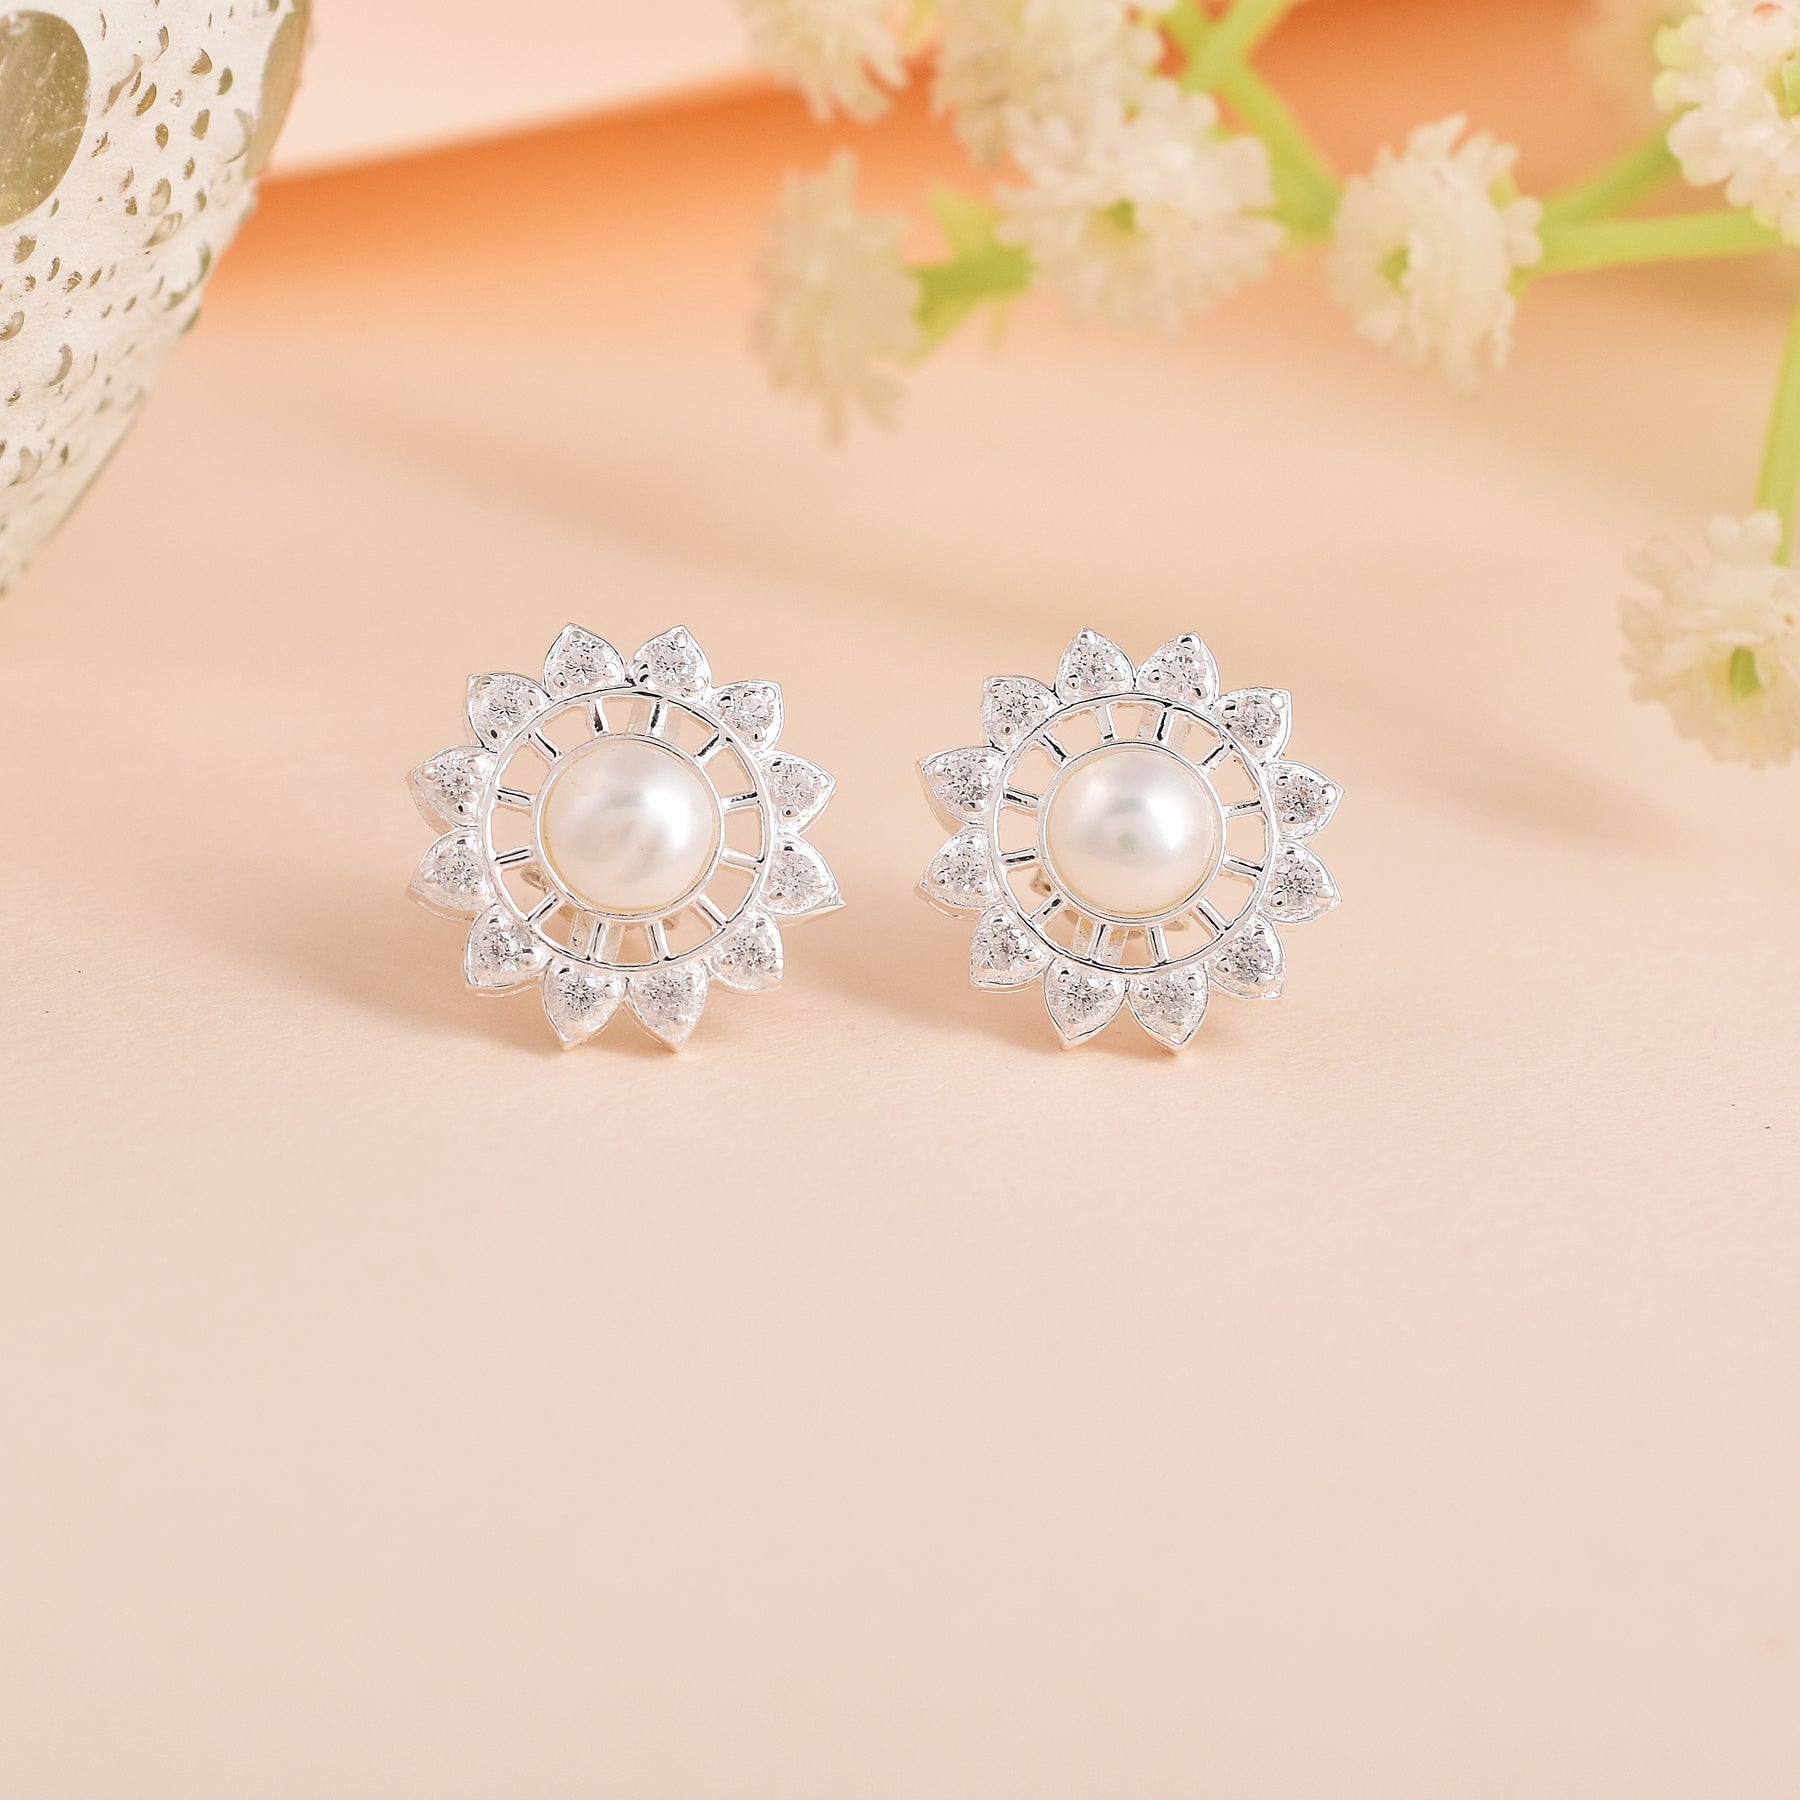 Marigold Stud Earrings with Ring Set